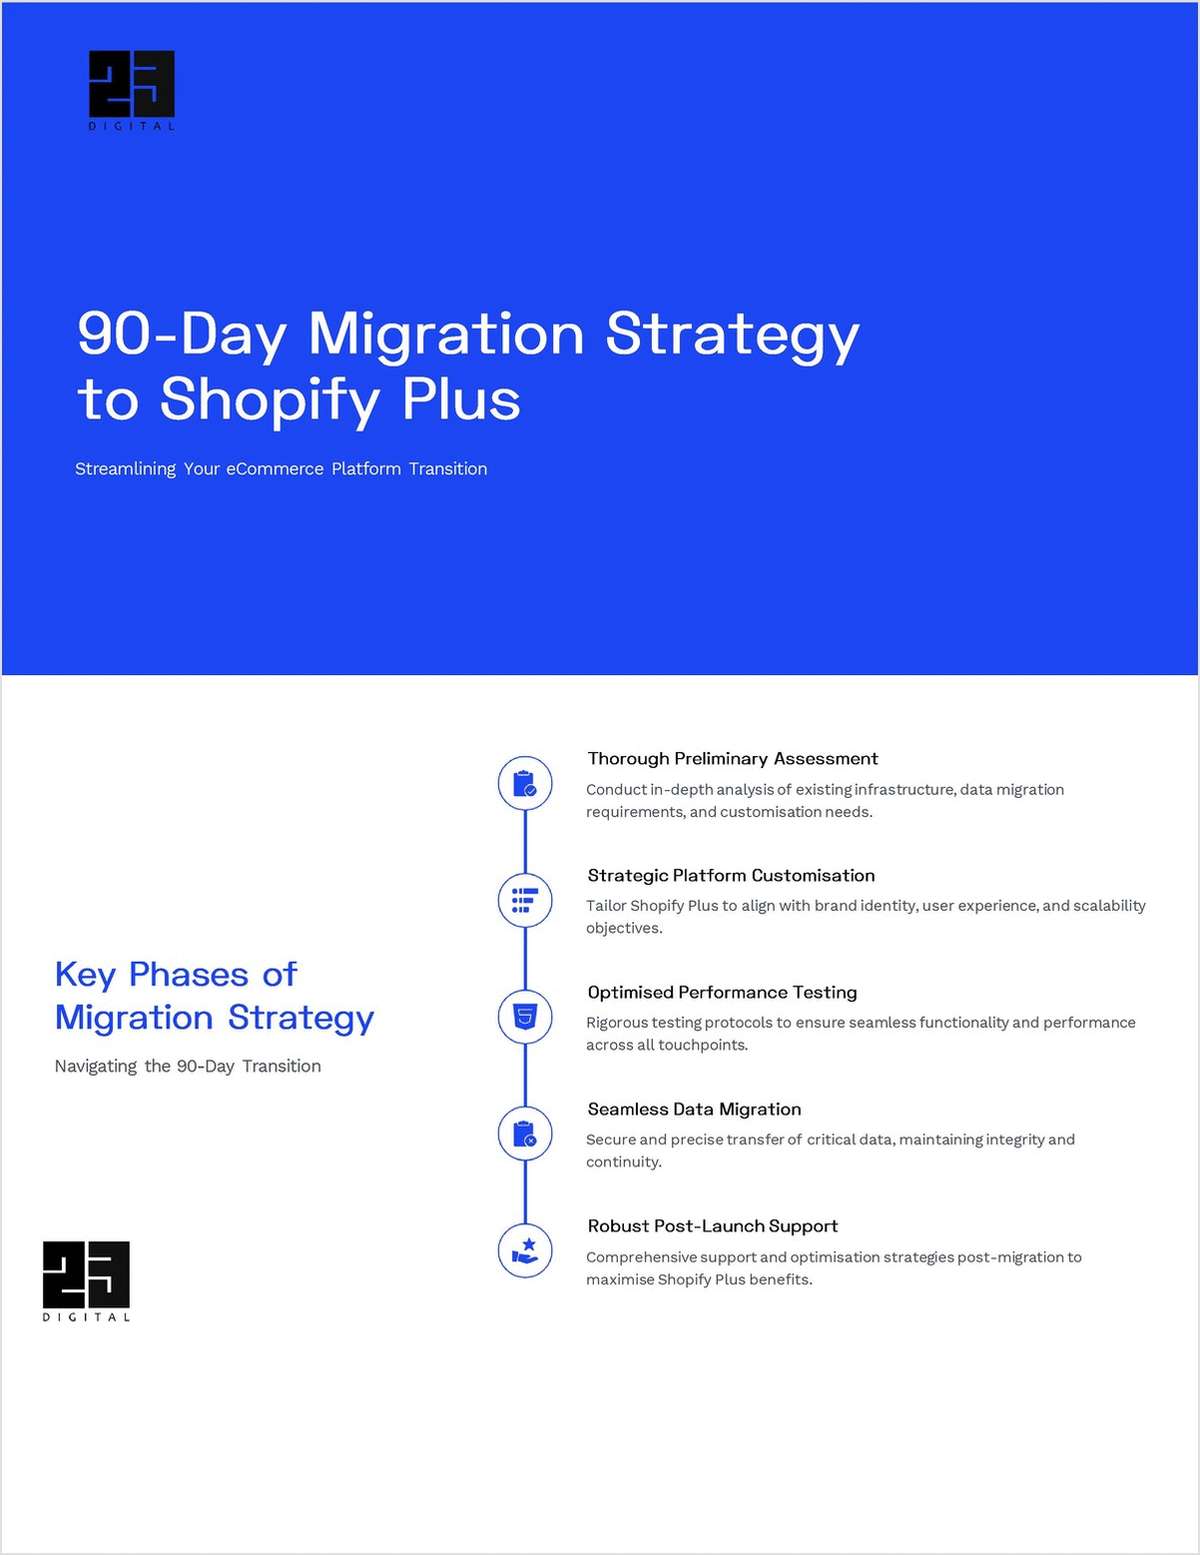 Migrate to Shopify Plus in 90 Days - a Strategic Guide